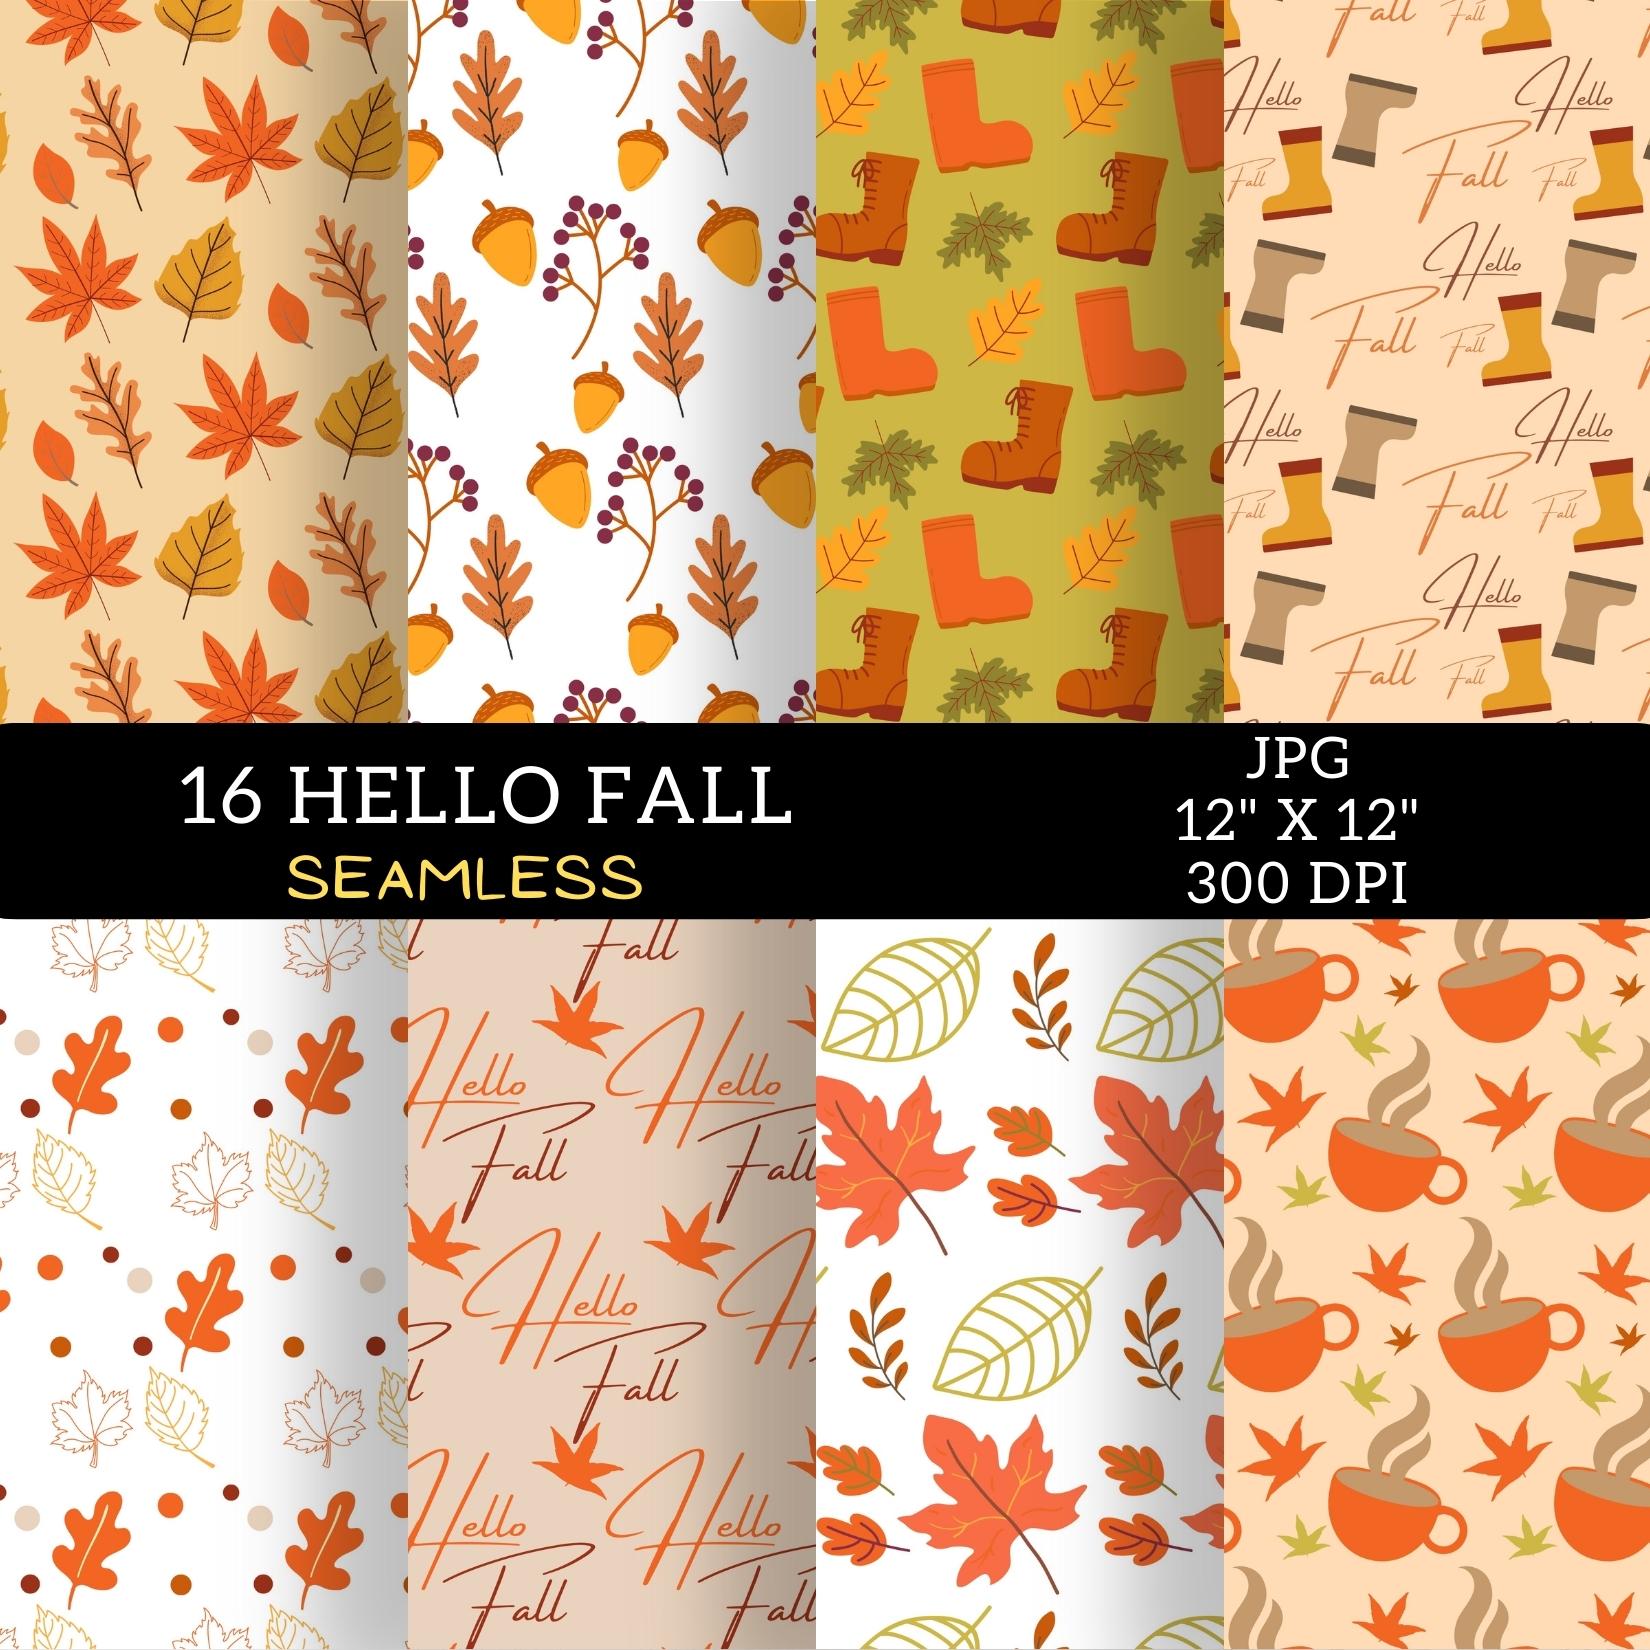 Autumn Digital Papers Patterns Design cover image.